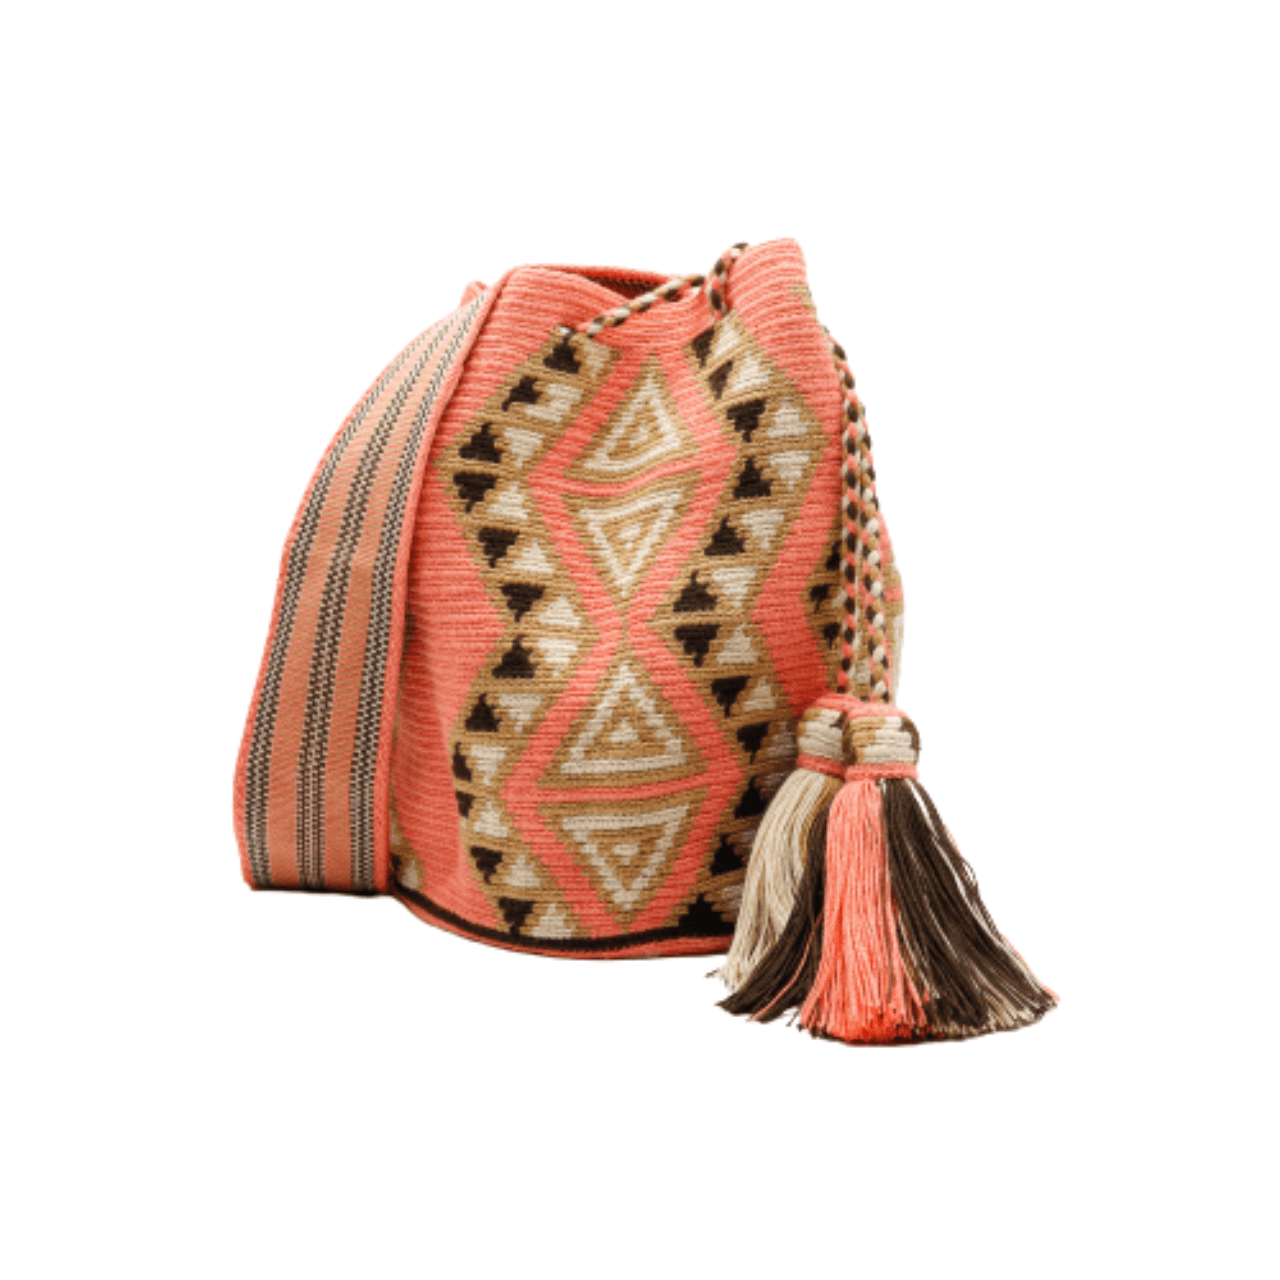 Lavinia Wayuu Bag - Rose Pink, Beige, and Brown Shades - Stunning Design - Exquisite Craftsmanship and Timeless Style